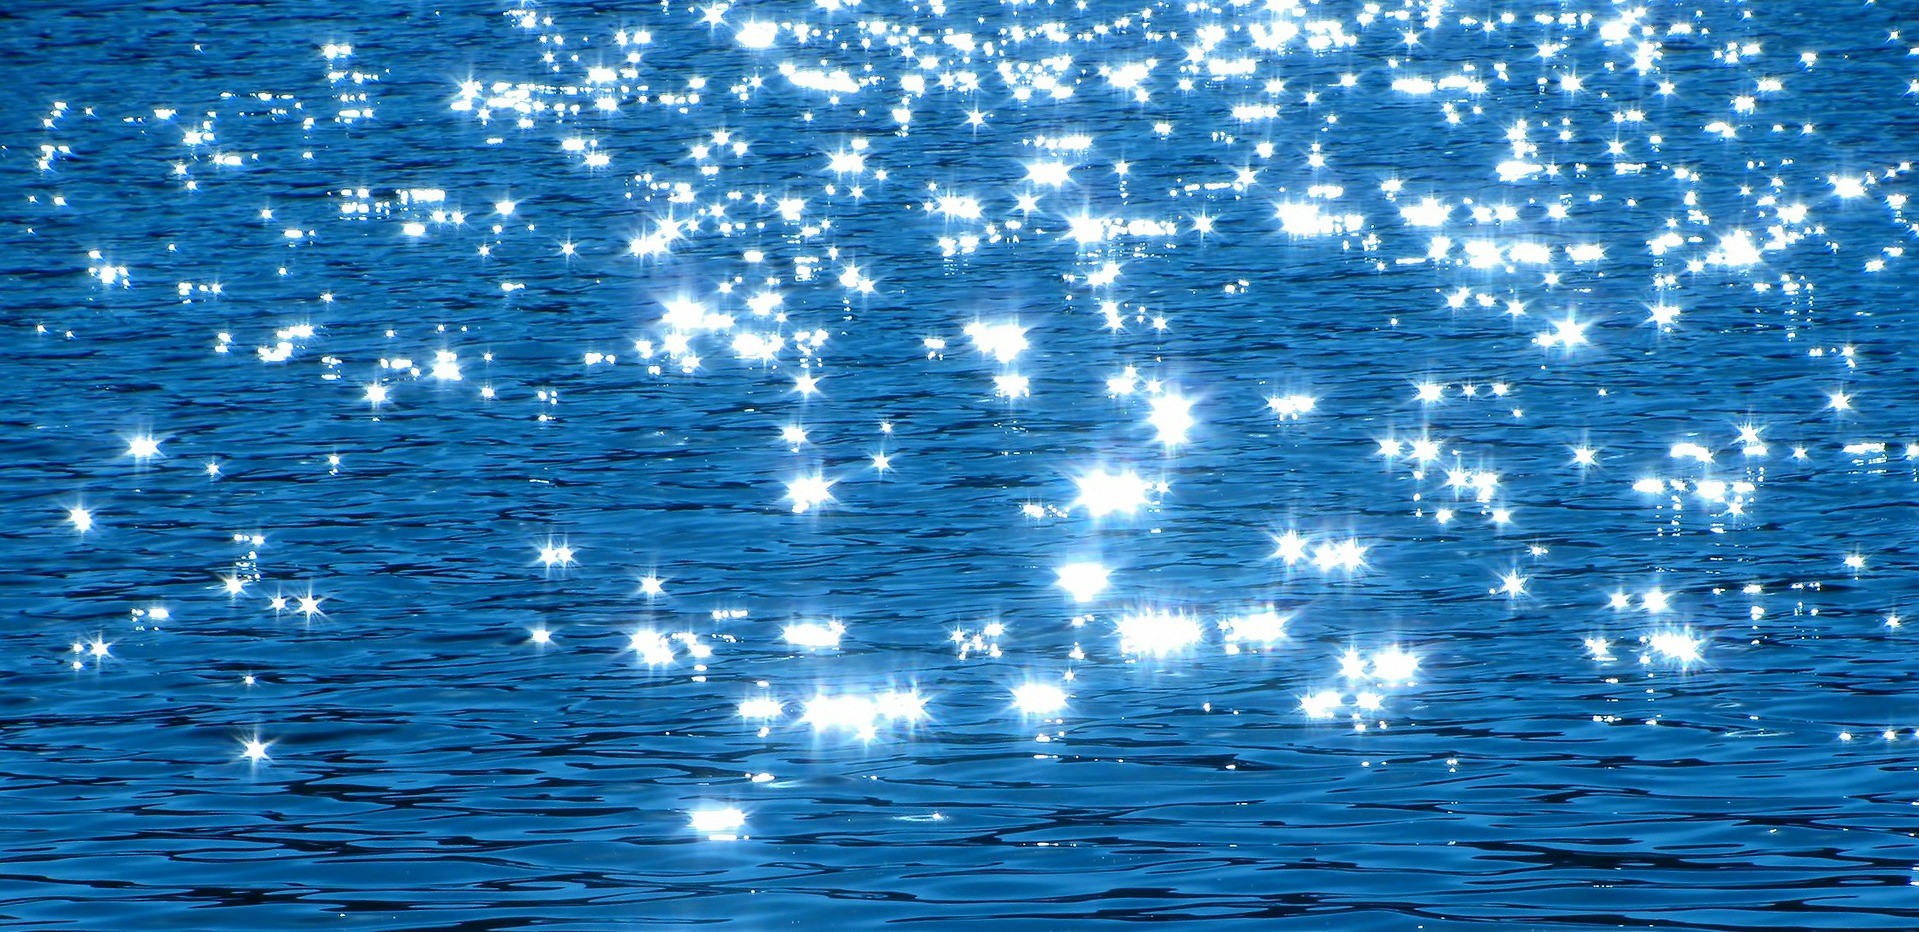 Water sparkle wow